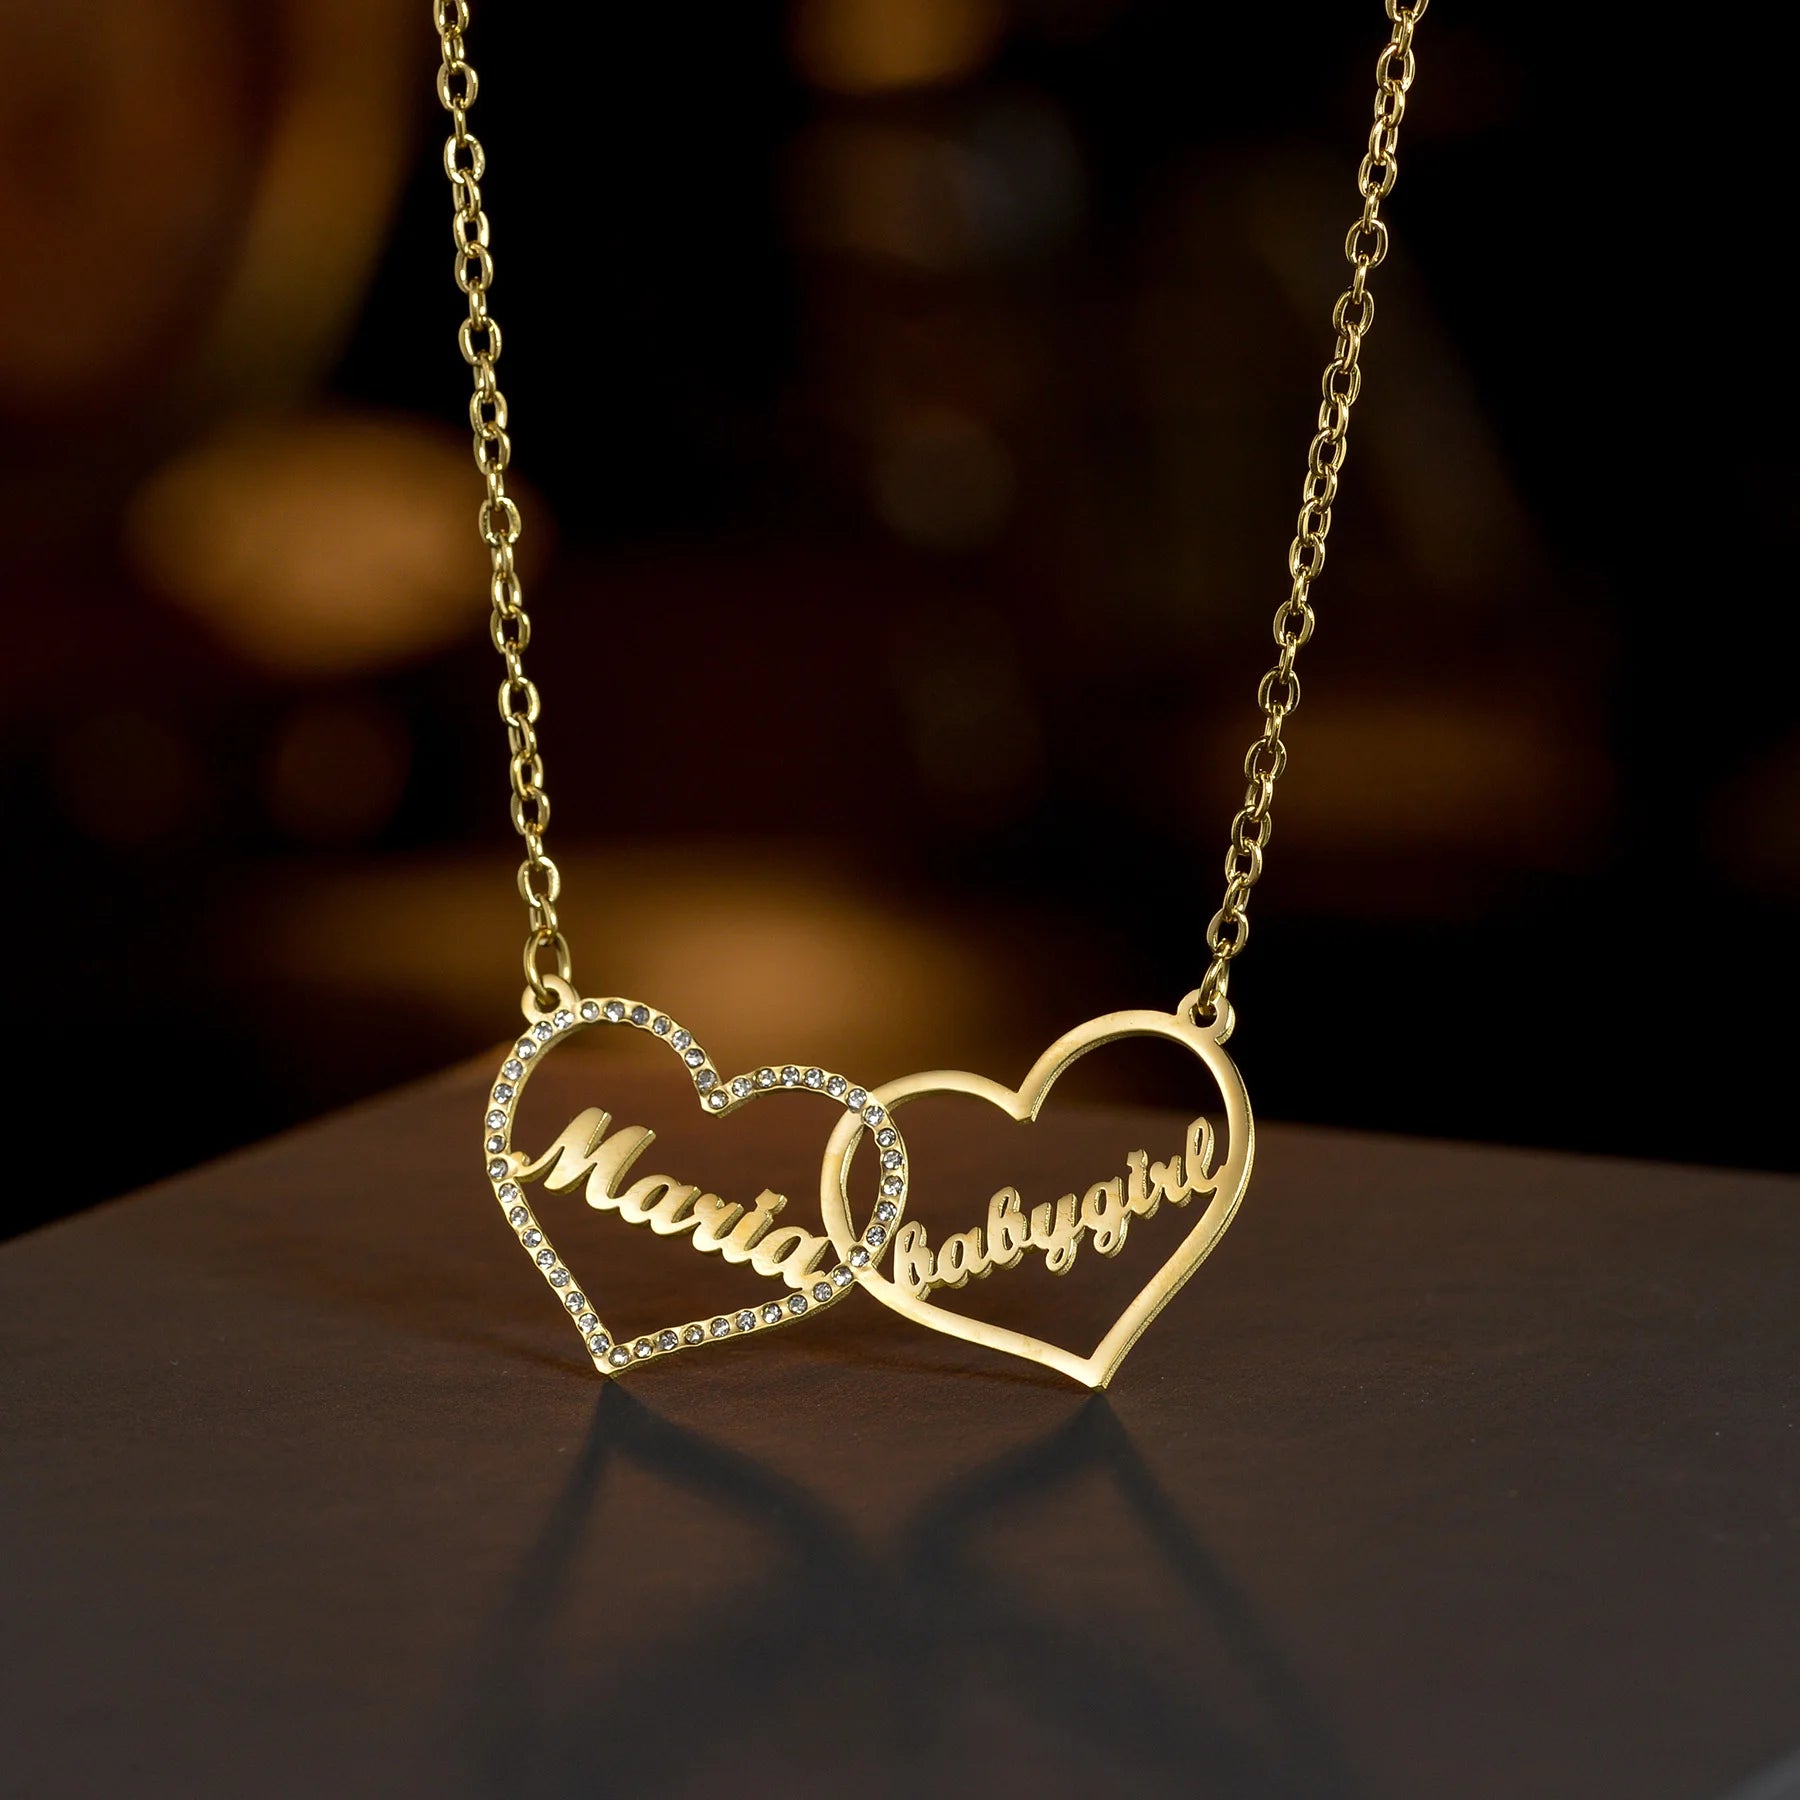 Exquisite 18K Gold Plated Personalized 2 Names Stone Heart Pendant Necklace